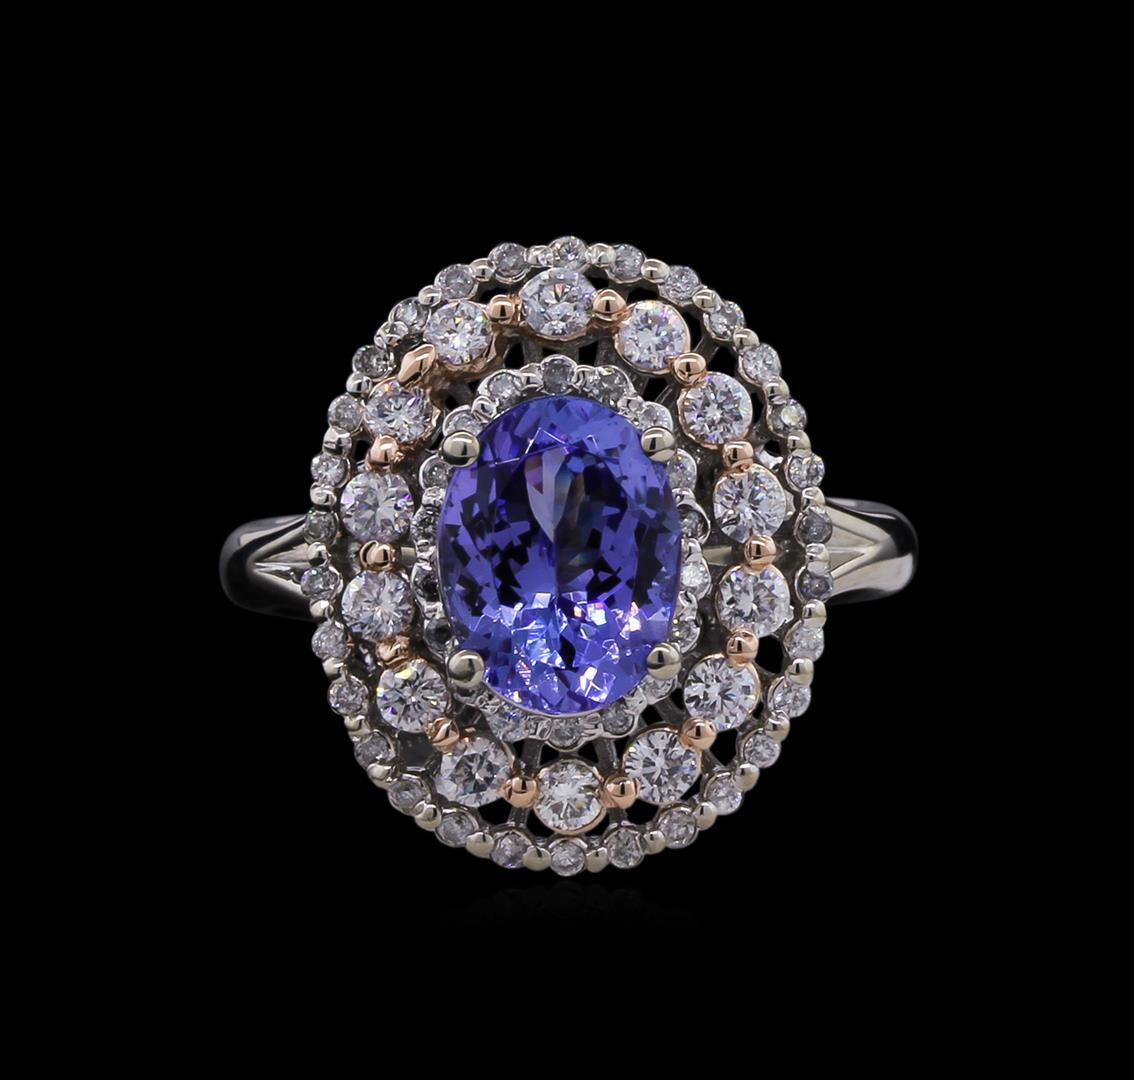 2.14 ctw Tanzanite and Diamond Ring - 14KT Two-Tone Gold